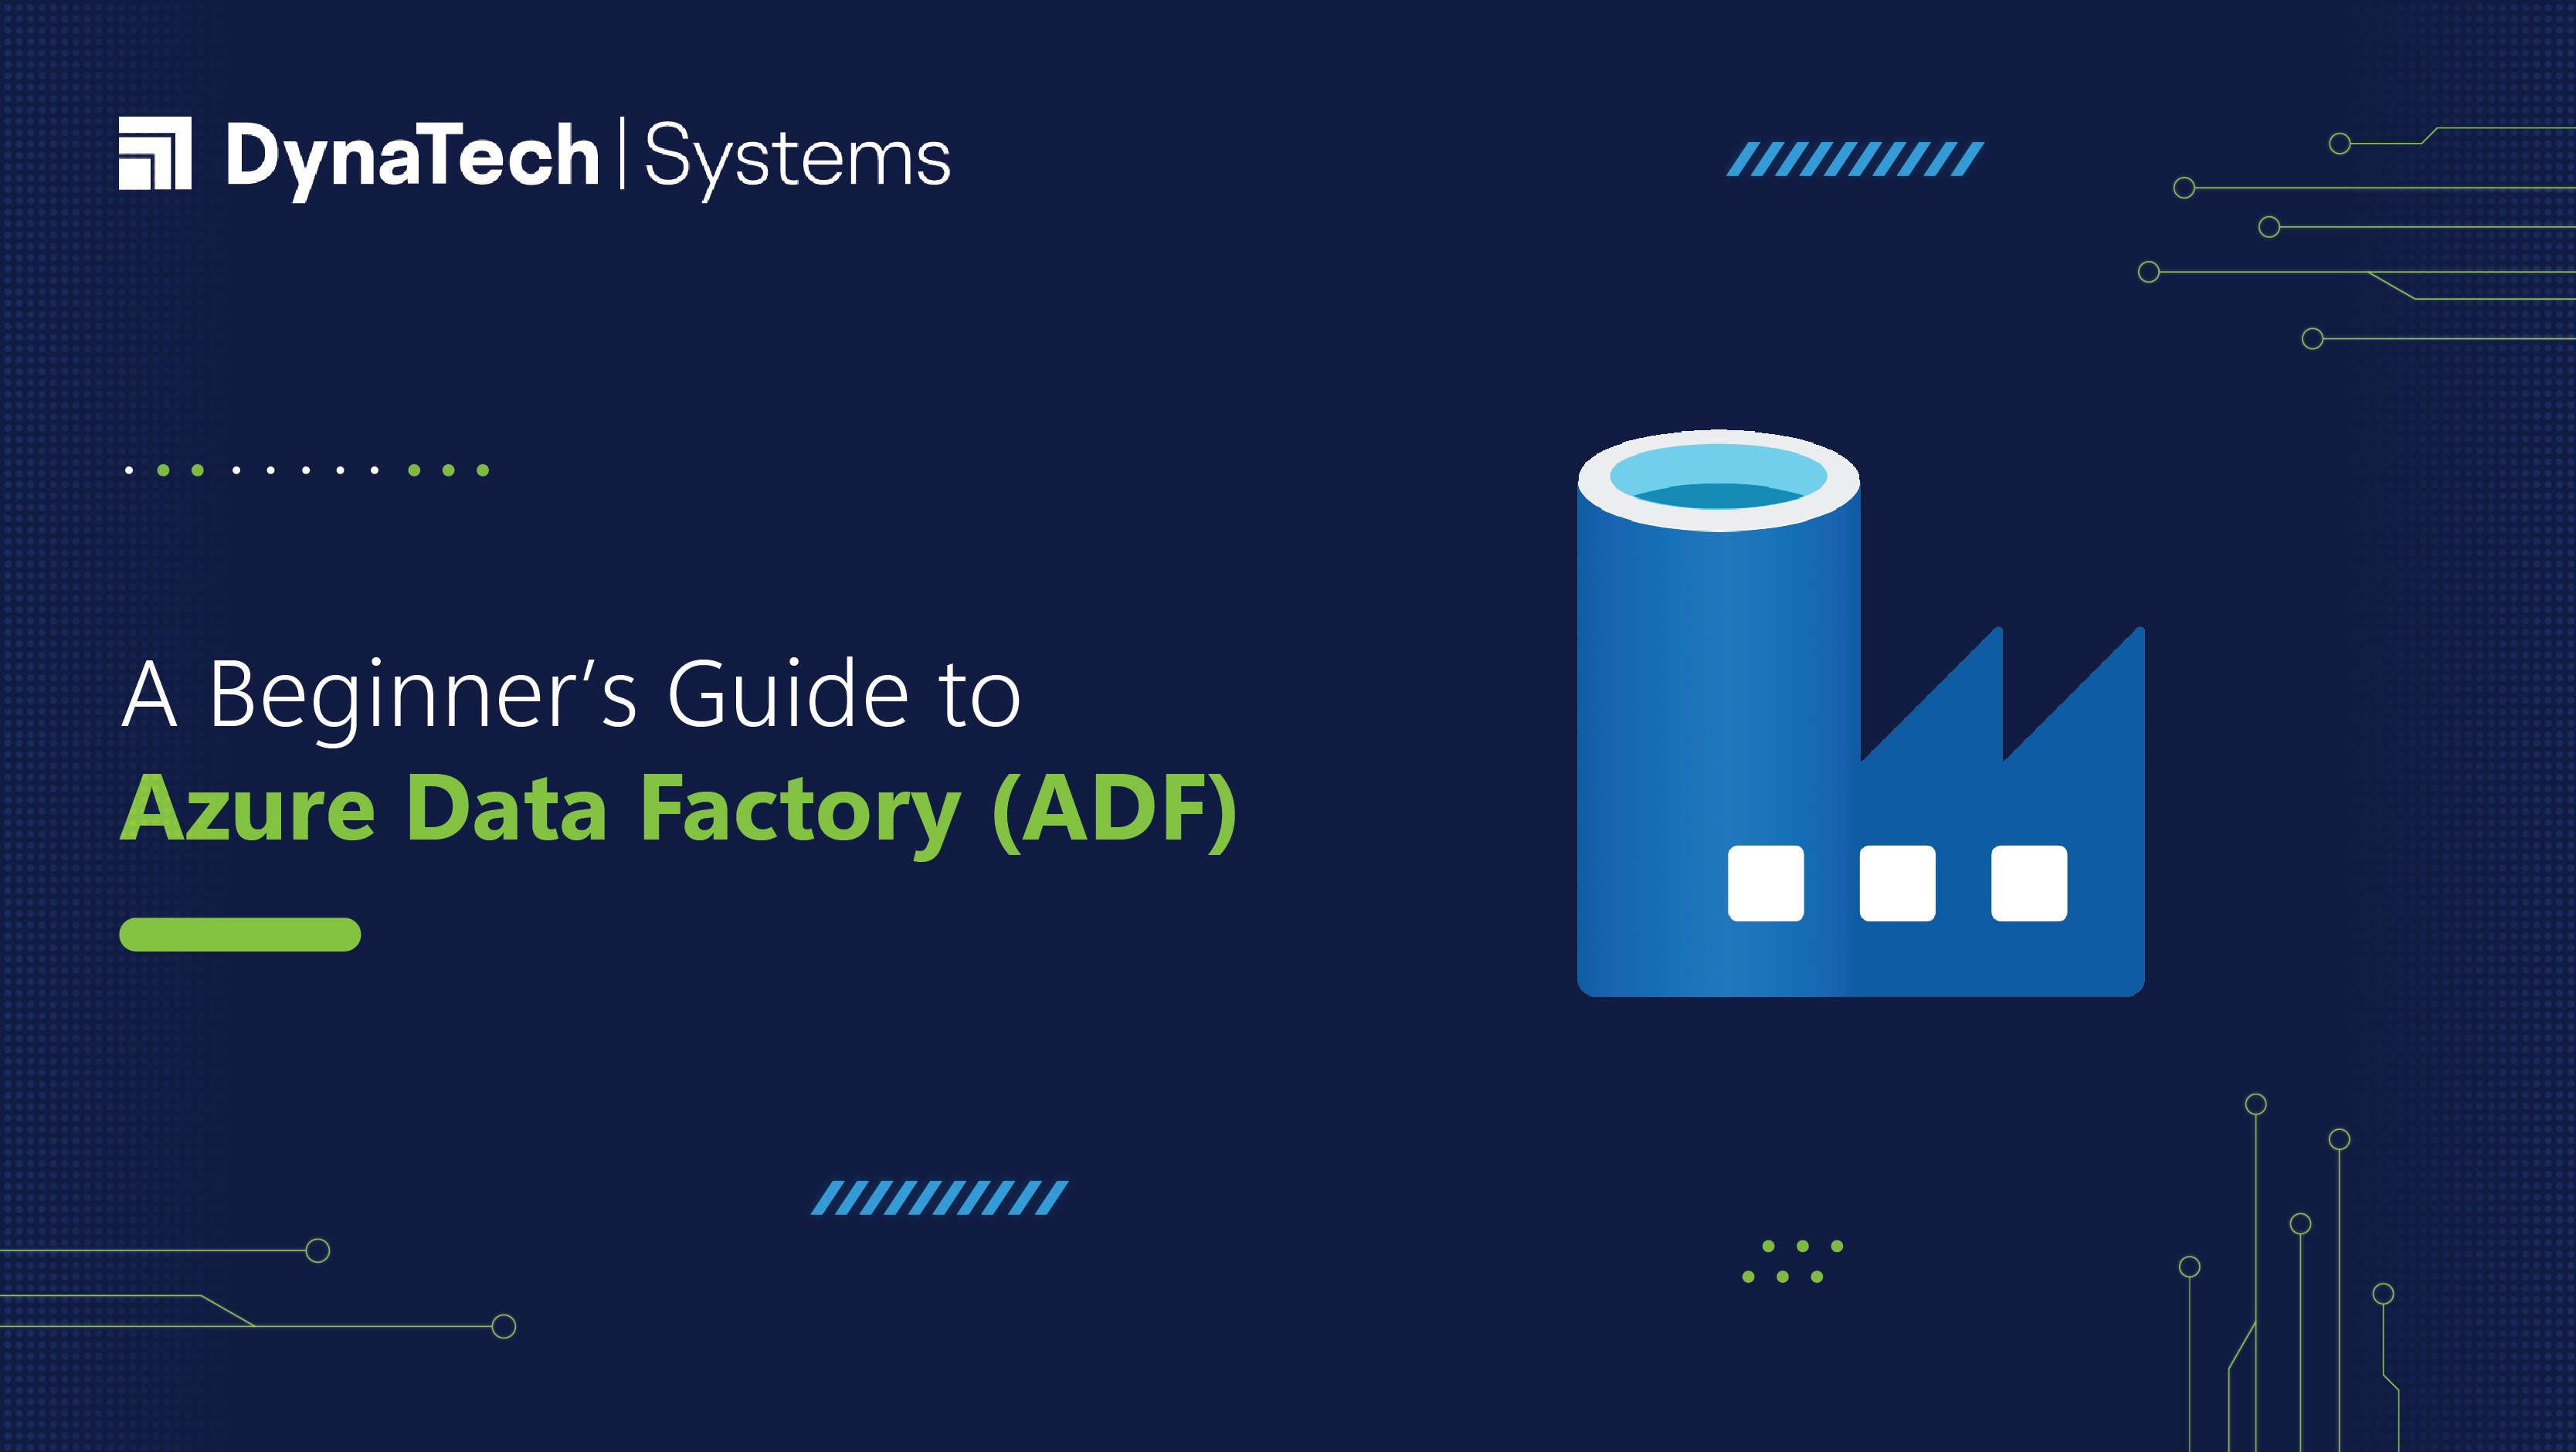 A Beginner’s Guide to Azure Data Factory (ADF)